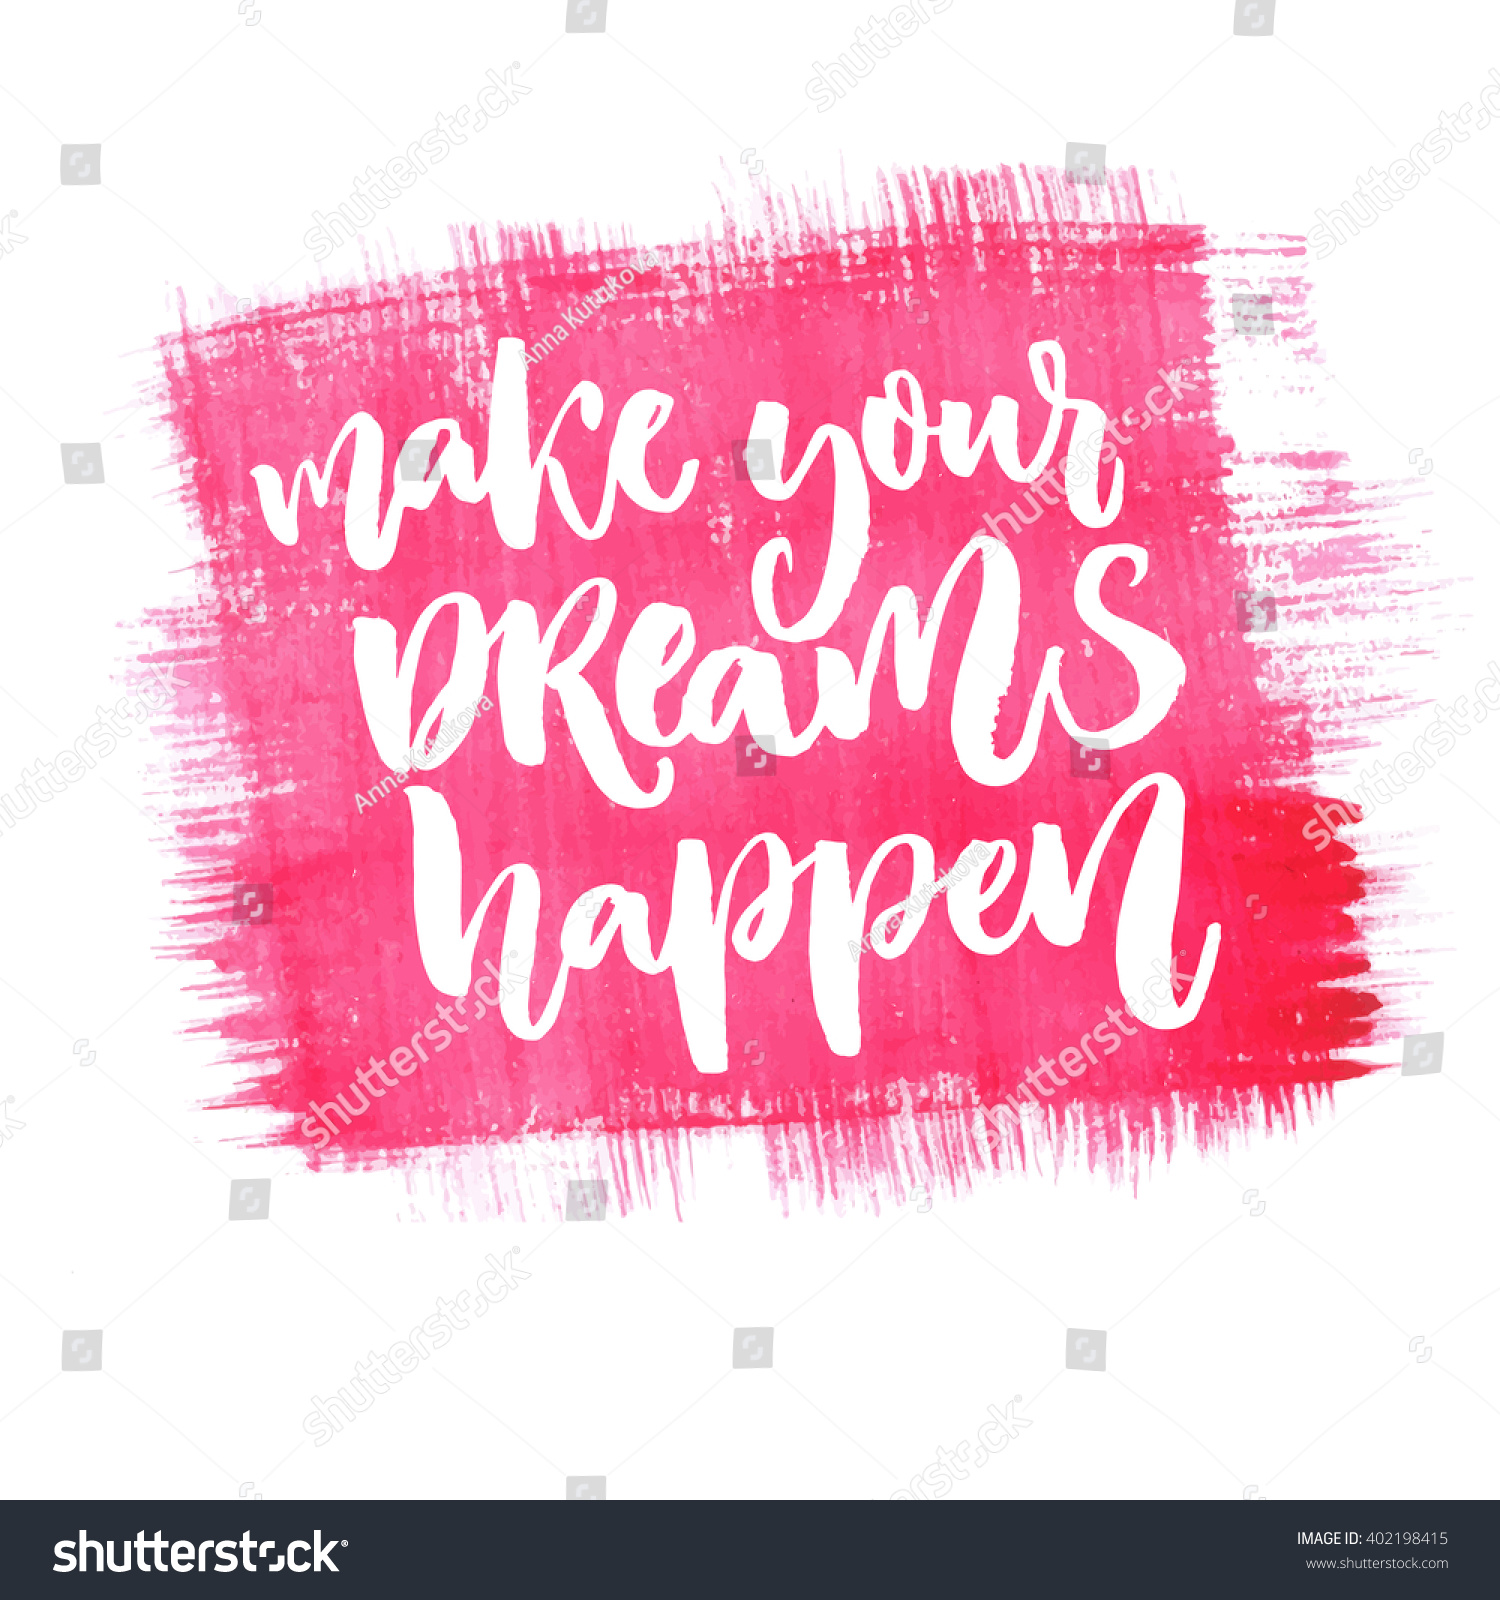 Make your dreams happen Inspirational quote about dream goals life Brush lettering